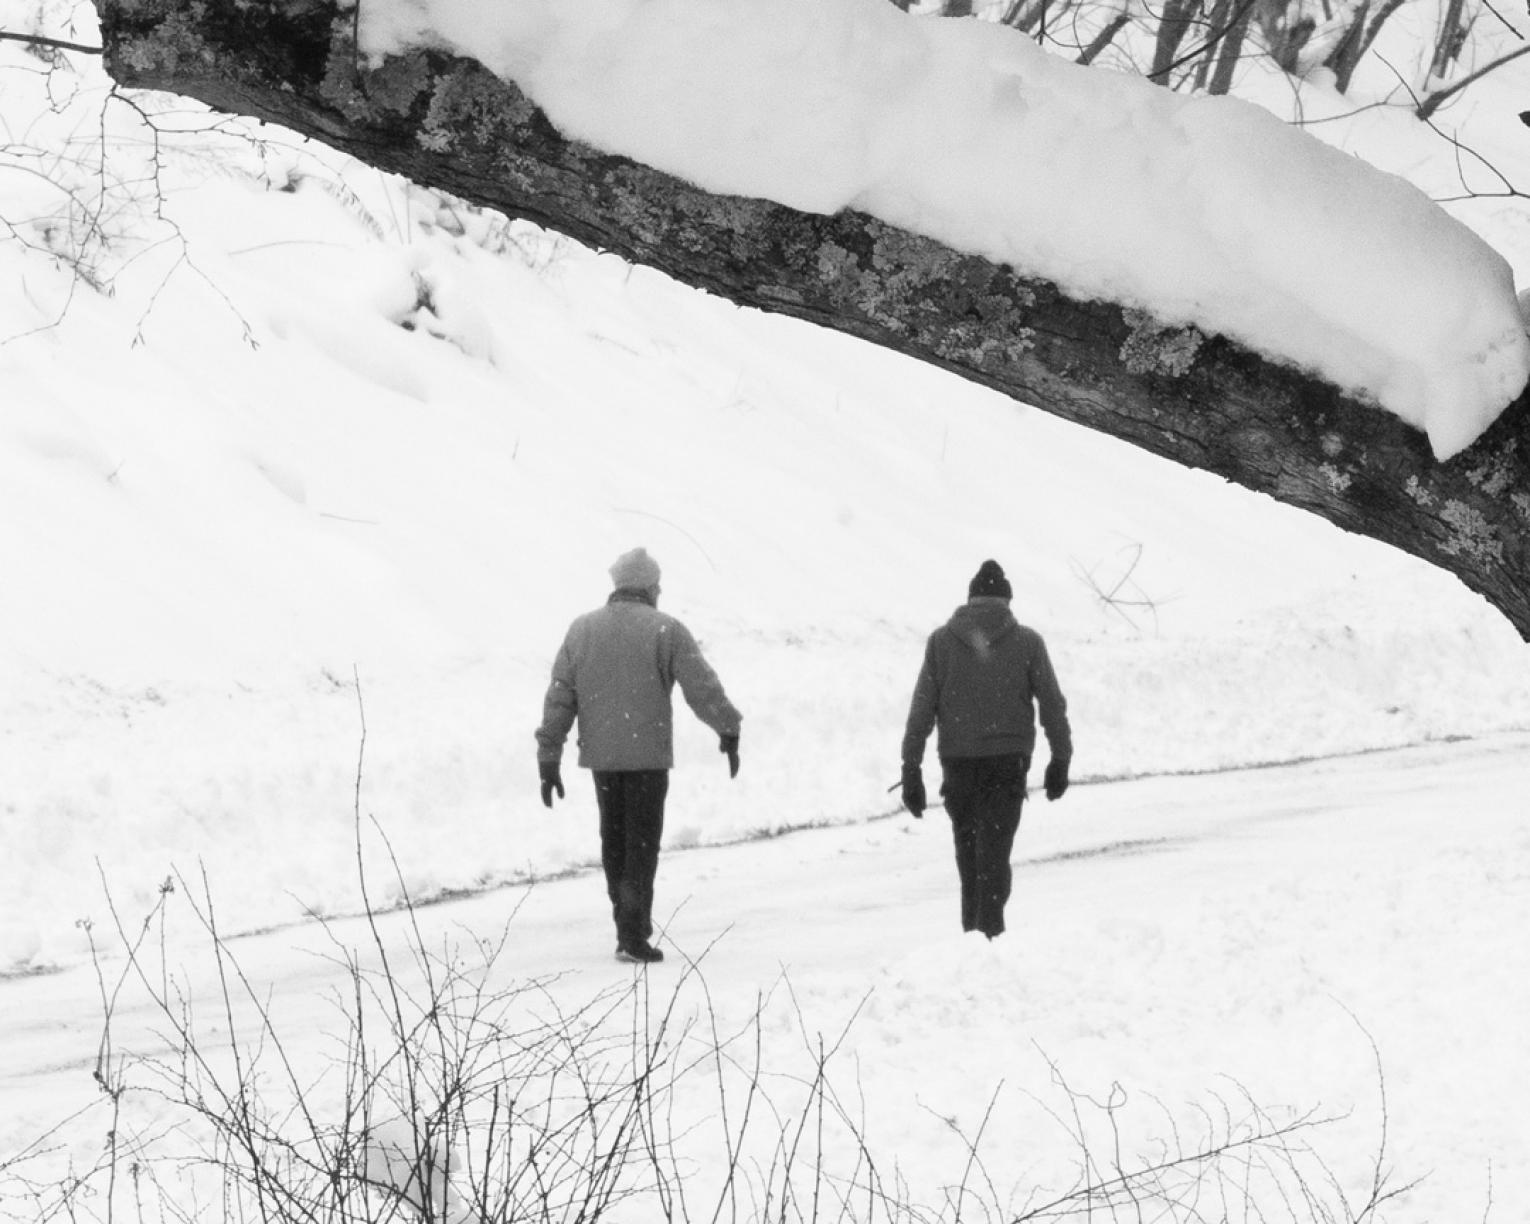 Black and white photograph of two men walking on snowy road